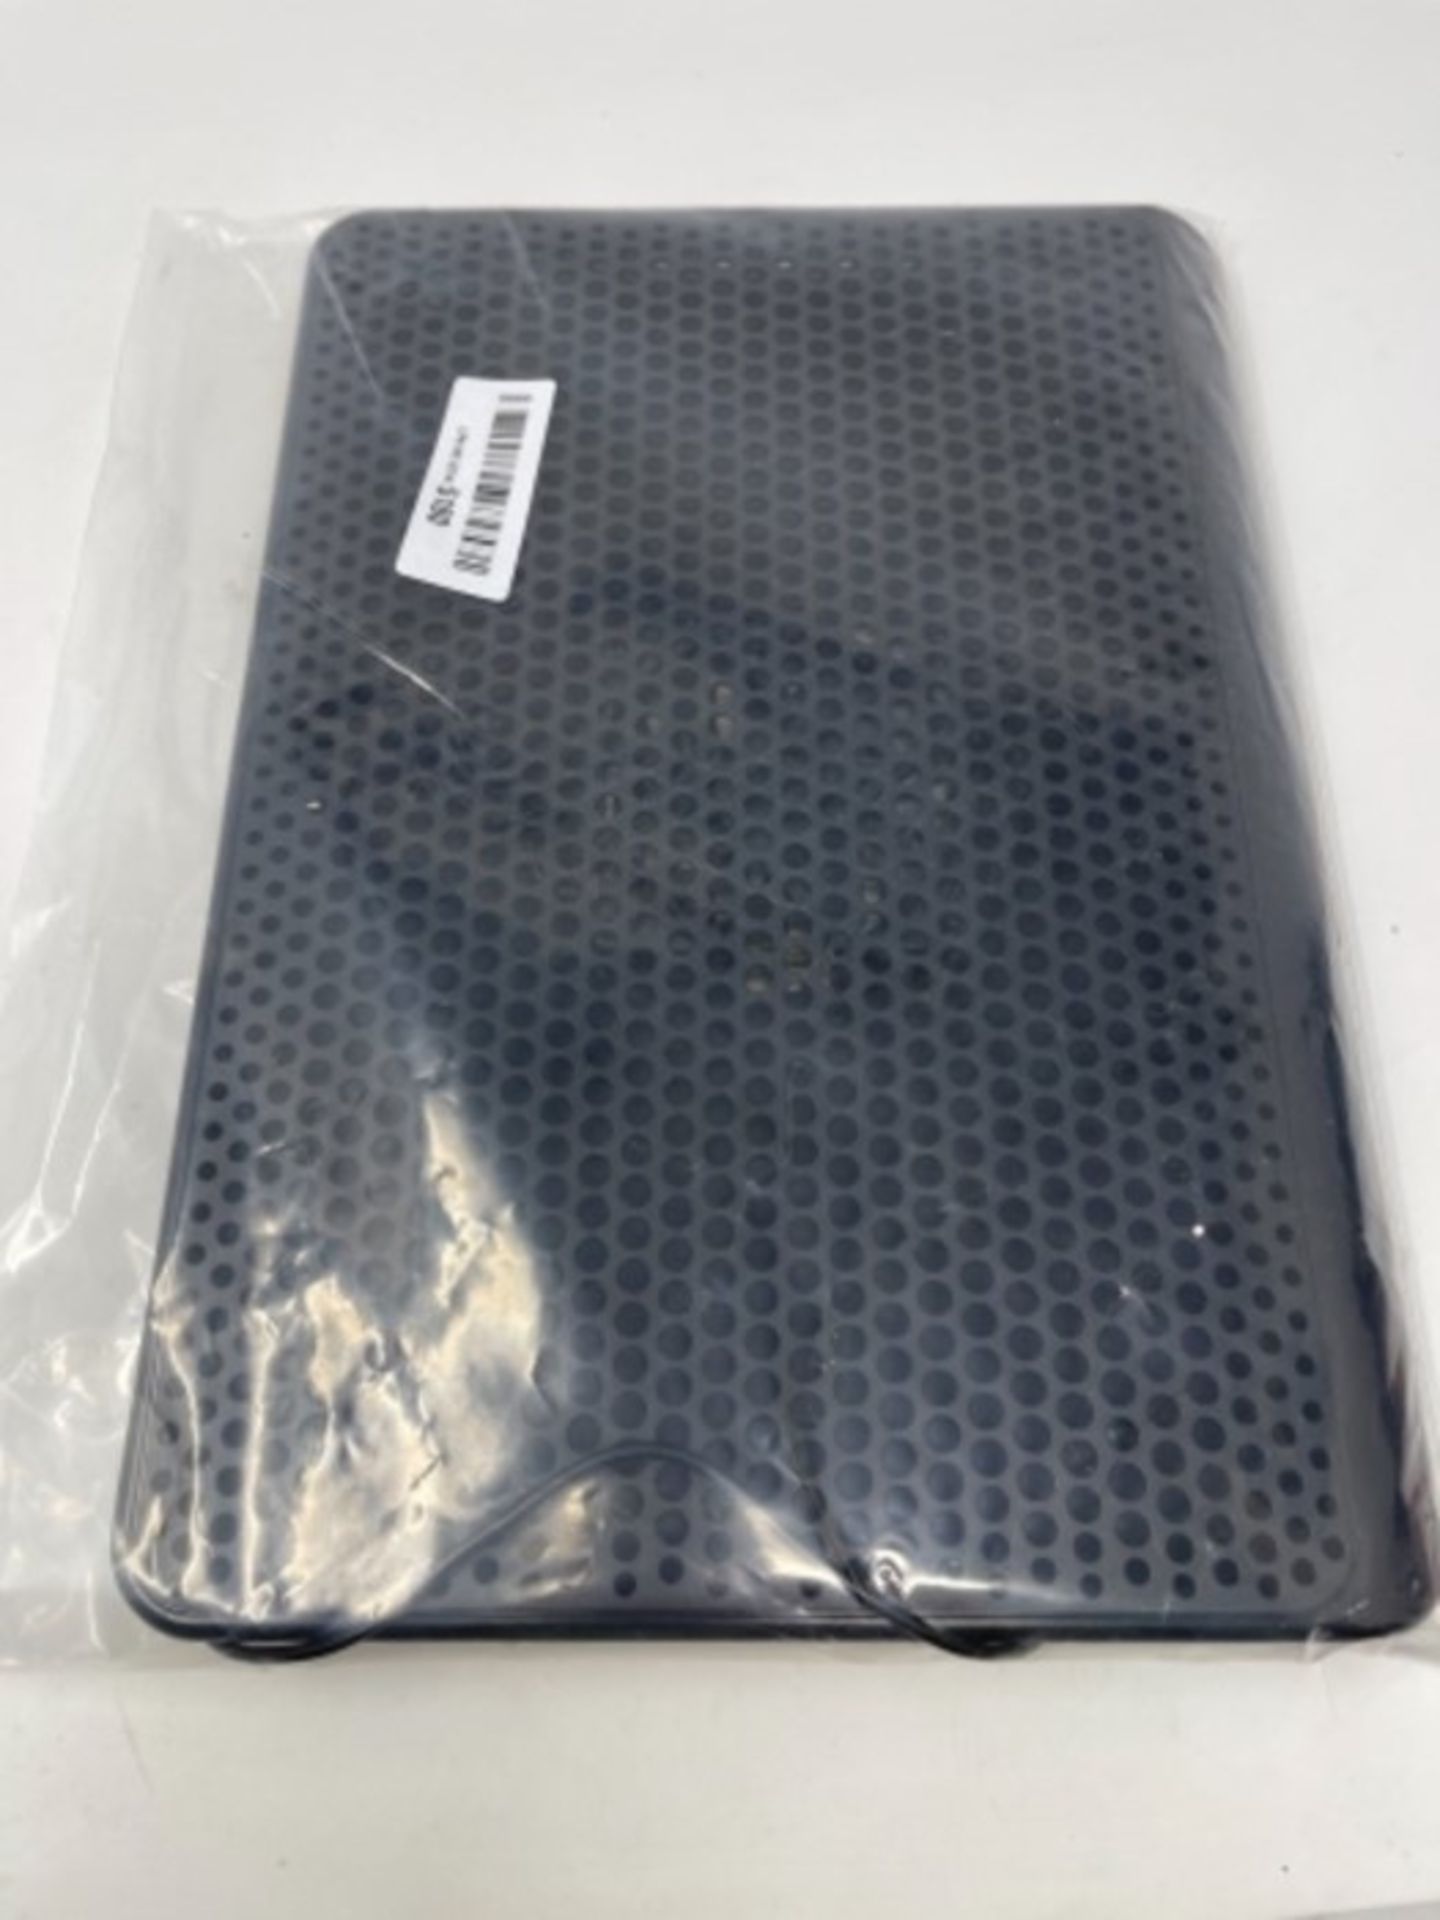 Targus Chill Mat Ultraslim Quiet and Portable Cooling Pad for Laptop, Black (AWE69EU) - Image 4 of 4